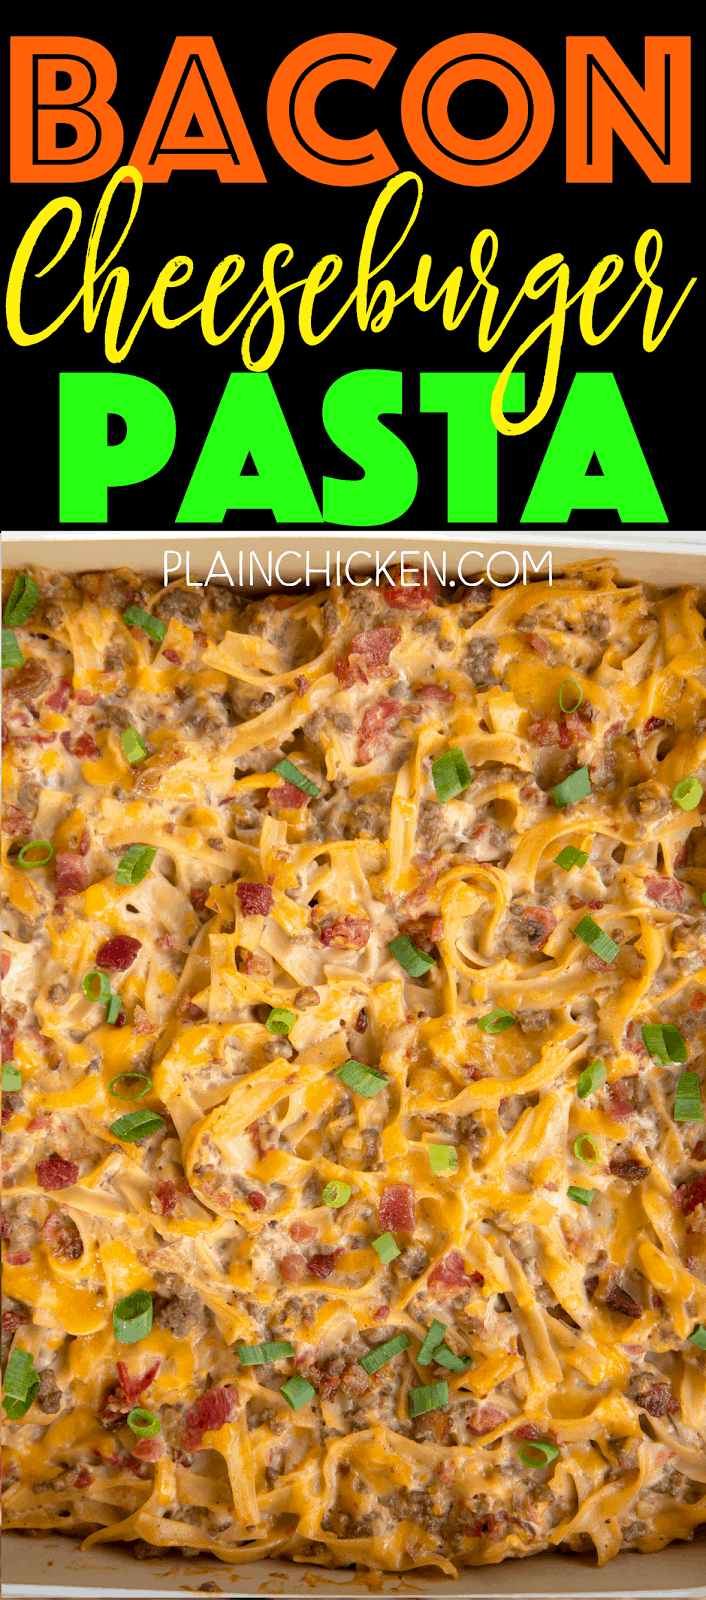 Bacon Cheeseburger Pasta - comfort food at its best! Everyone cleaned their plate!! Hamburger, bacon, hamburger seasoning, cheese soup, sour cream, cheddar cheese and diced tomatoes. Can make ahead and freeze casserole for later. Such an easy dinner recipe!